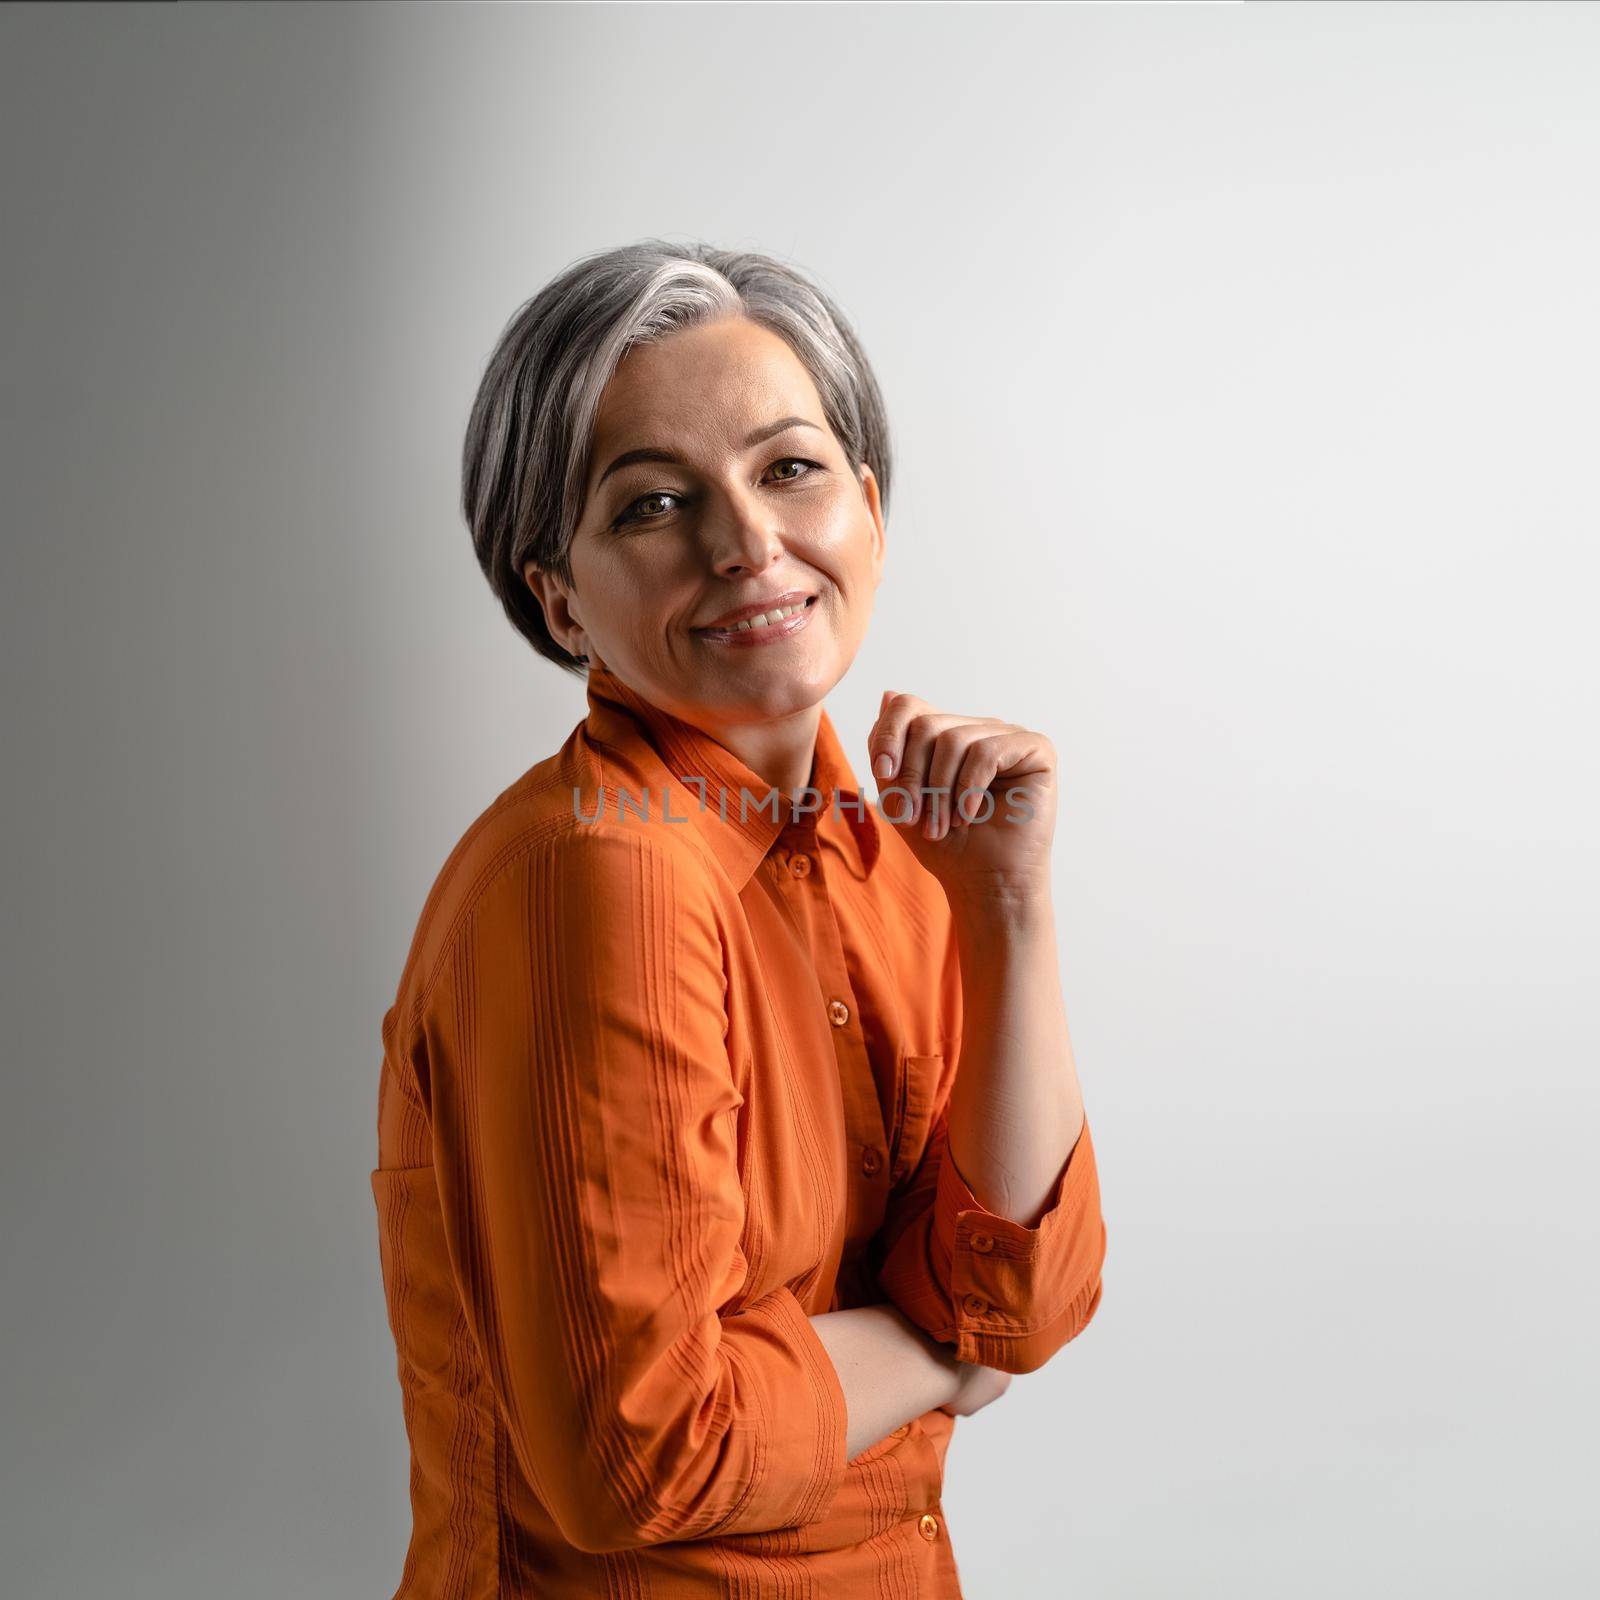 Portrait of a mature grey haired woman wearing orange shirt happily smiling on camera. Pretty mid aged grey haired woman in orange shirt isolated on grey background.